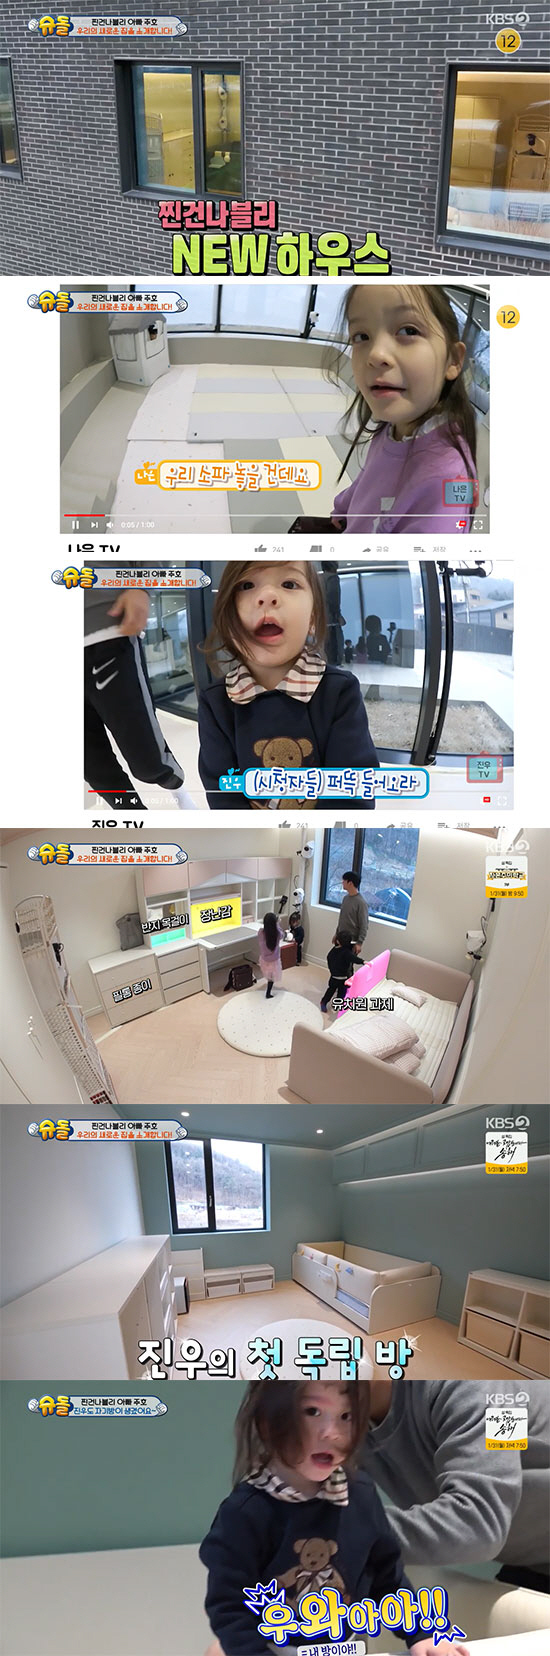 Park Joo-Hone Steannablis new house in Hanam has been unveiled.KBS 2TV The Return of Superman (hereinafter referred to as The Return of Superman) 416 times was broadcast on the 23rd, and the new house of Hanam of Chin Gunnabli was released under the theme of New every day because of you.Park Joo-ho and Chin Gunnabli headed to Hanams new home on the day.Hanam House is a house that reflects the opinions of children from the first time it was built, and it has raised many viewers curiosity from the process of making it.Park Joo-ho and Chin Gunnabli entered the new house with a thrilling heart; each child took a camera and introduced a new home to Aunt Lanson - uncles.Na-eun introduced her room and revealed her plans for where and what to put.Especially the first independent room of the youngest Qiao Zhenyu, who ran to bed as soon as he entered the room and showed his joy.The children then set out to decorate their own rooms; Na-eun used a light bulb, his fathers surprise gift, to decorate the walls.He unravels the twisted light bulb line by himself and puts the light bulb on the wall in his name.